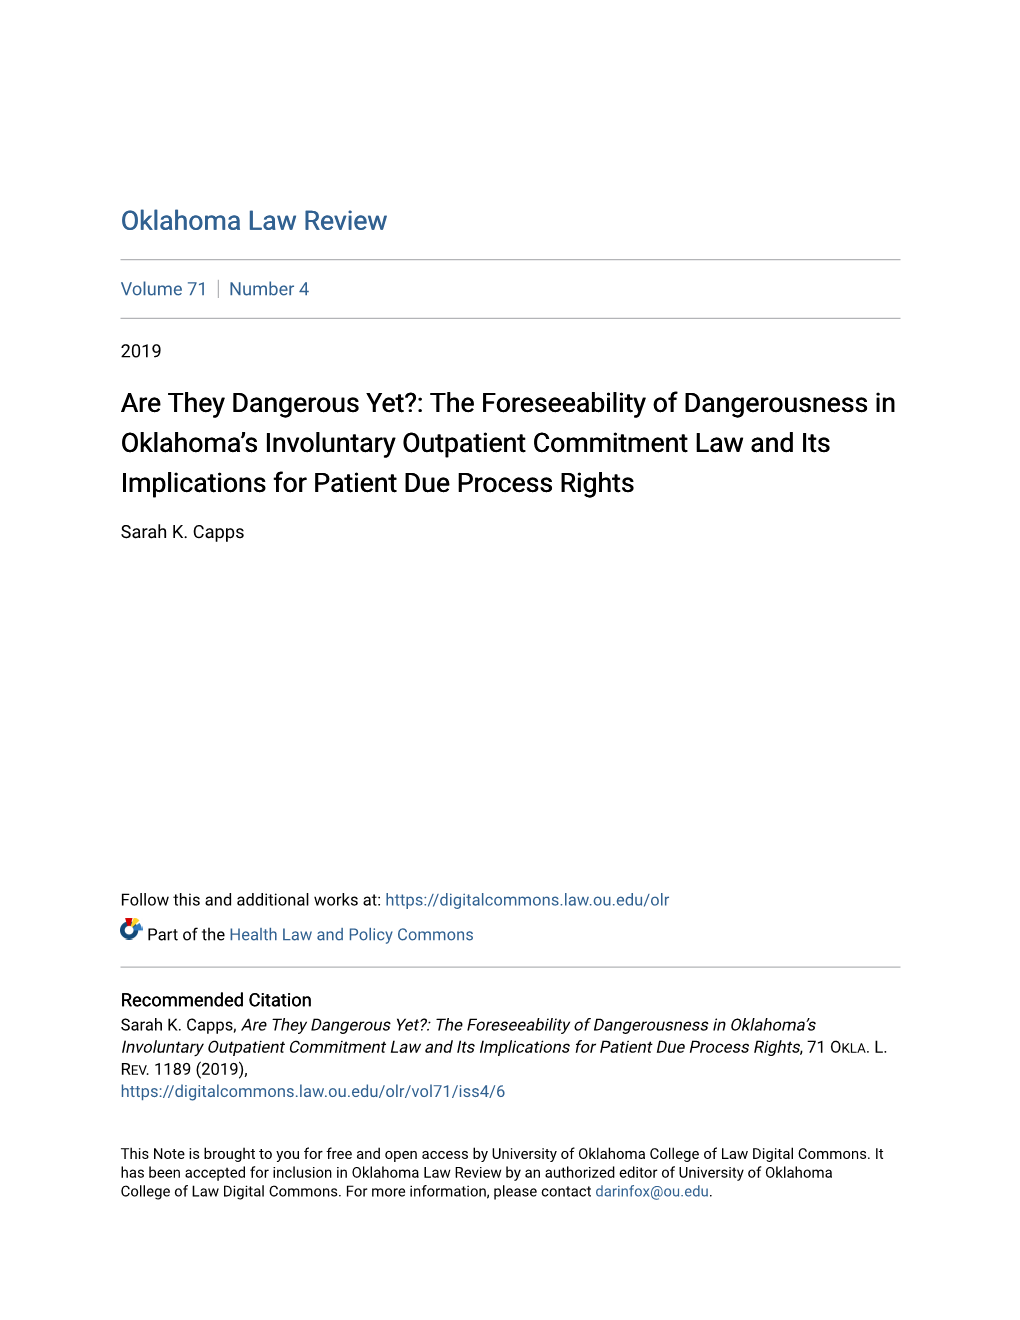 Are They Dangerous Yet?: the Foreseeability of Dangerousness in Oklahomaâ•Žs Involuntary Outpatient Commitment Law and Its I